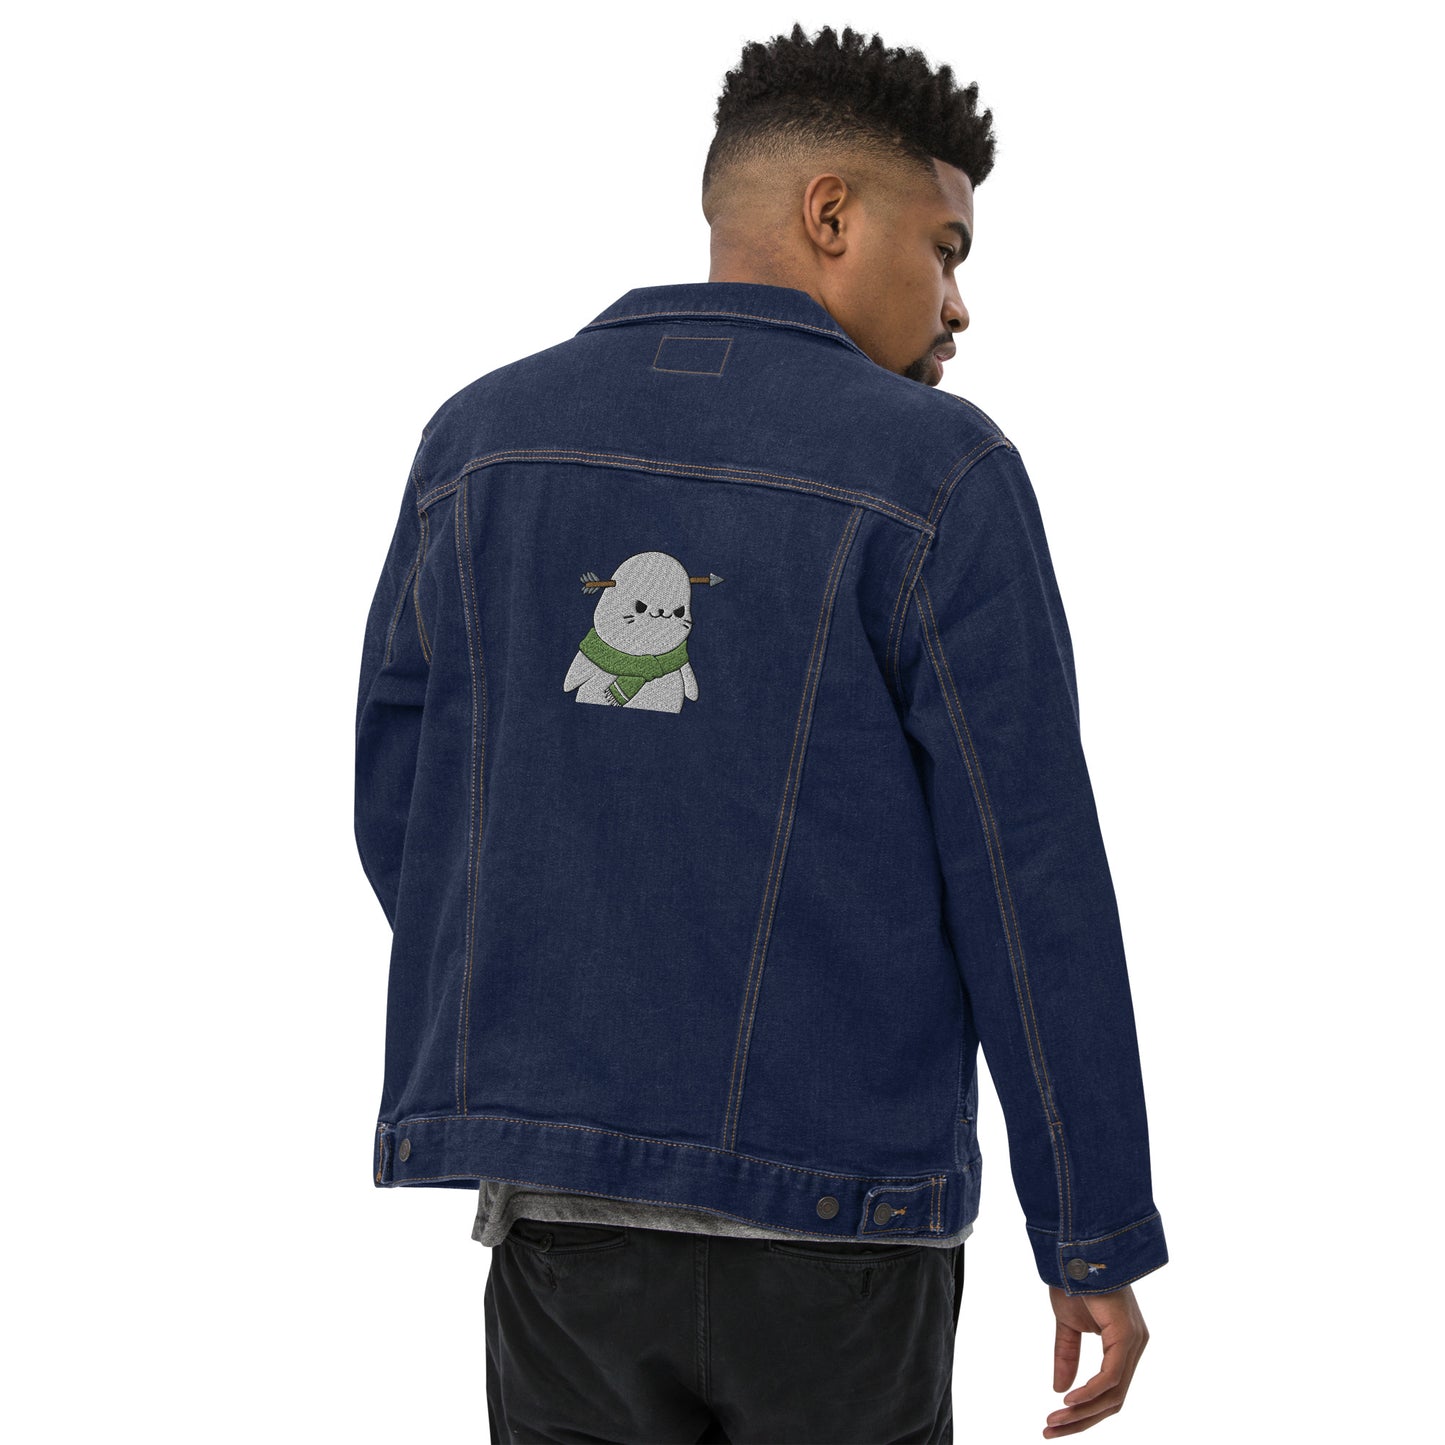 Denim jacket feat. Sappy Seal #344 (embroidered)